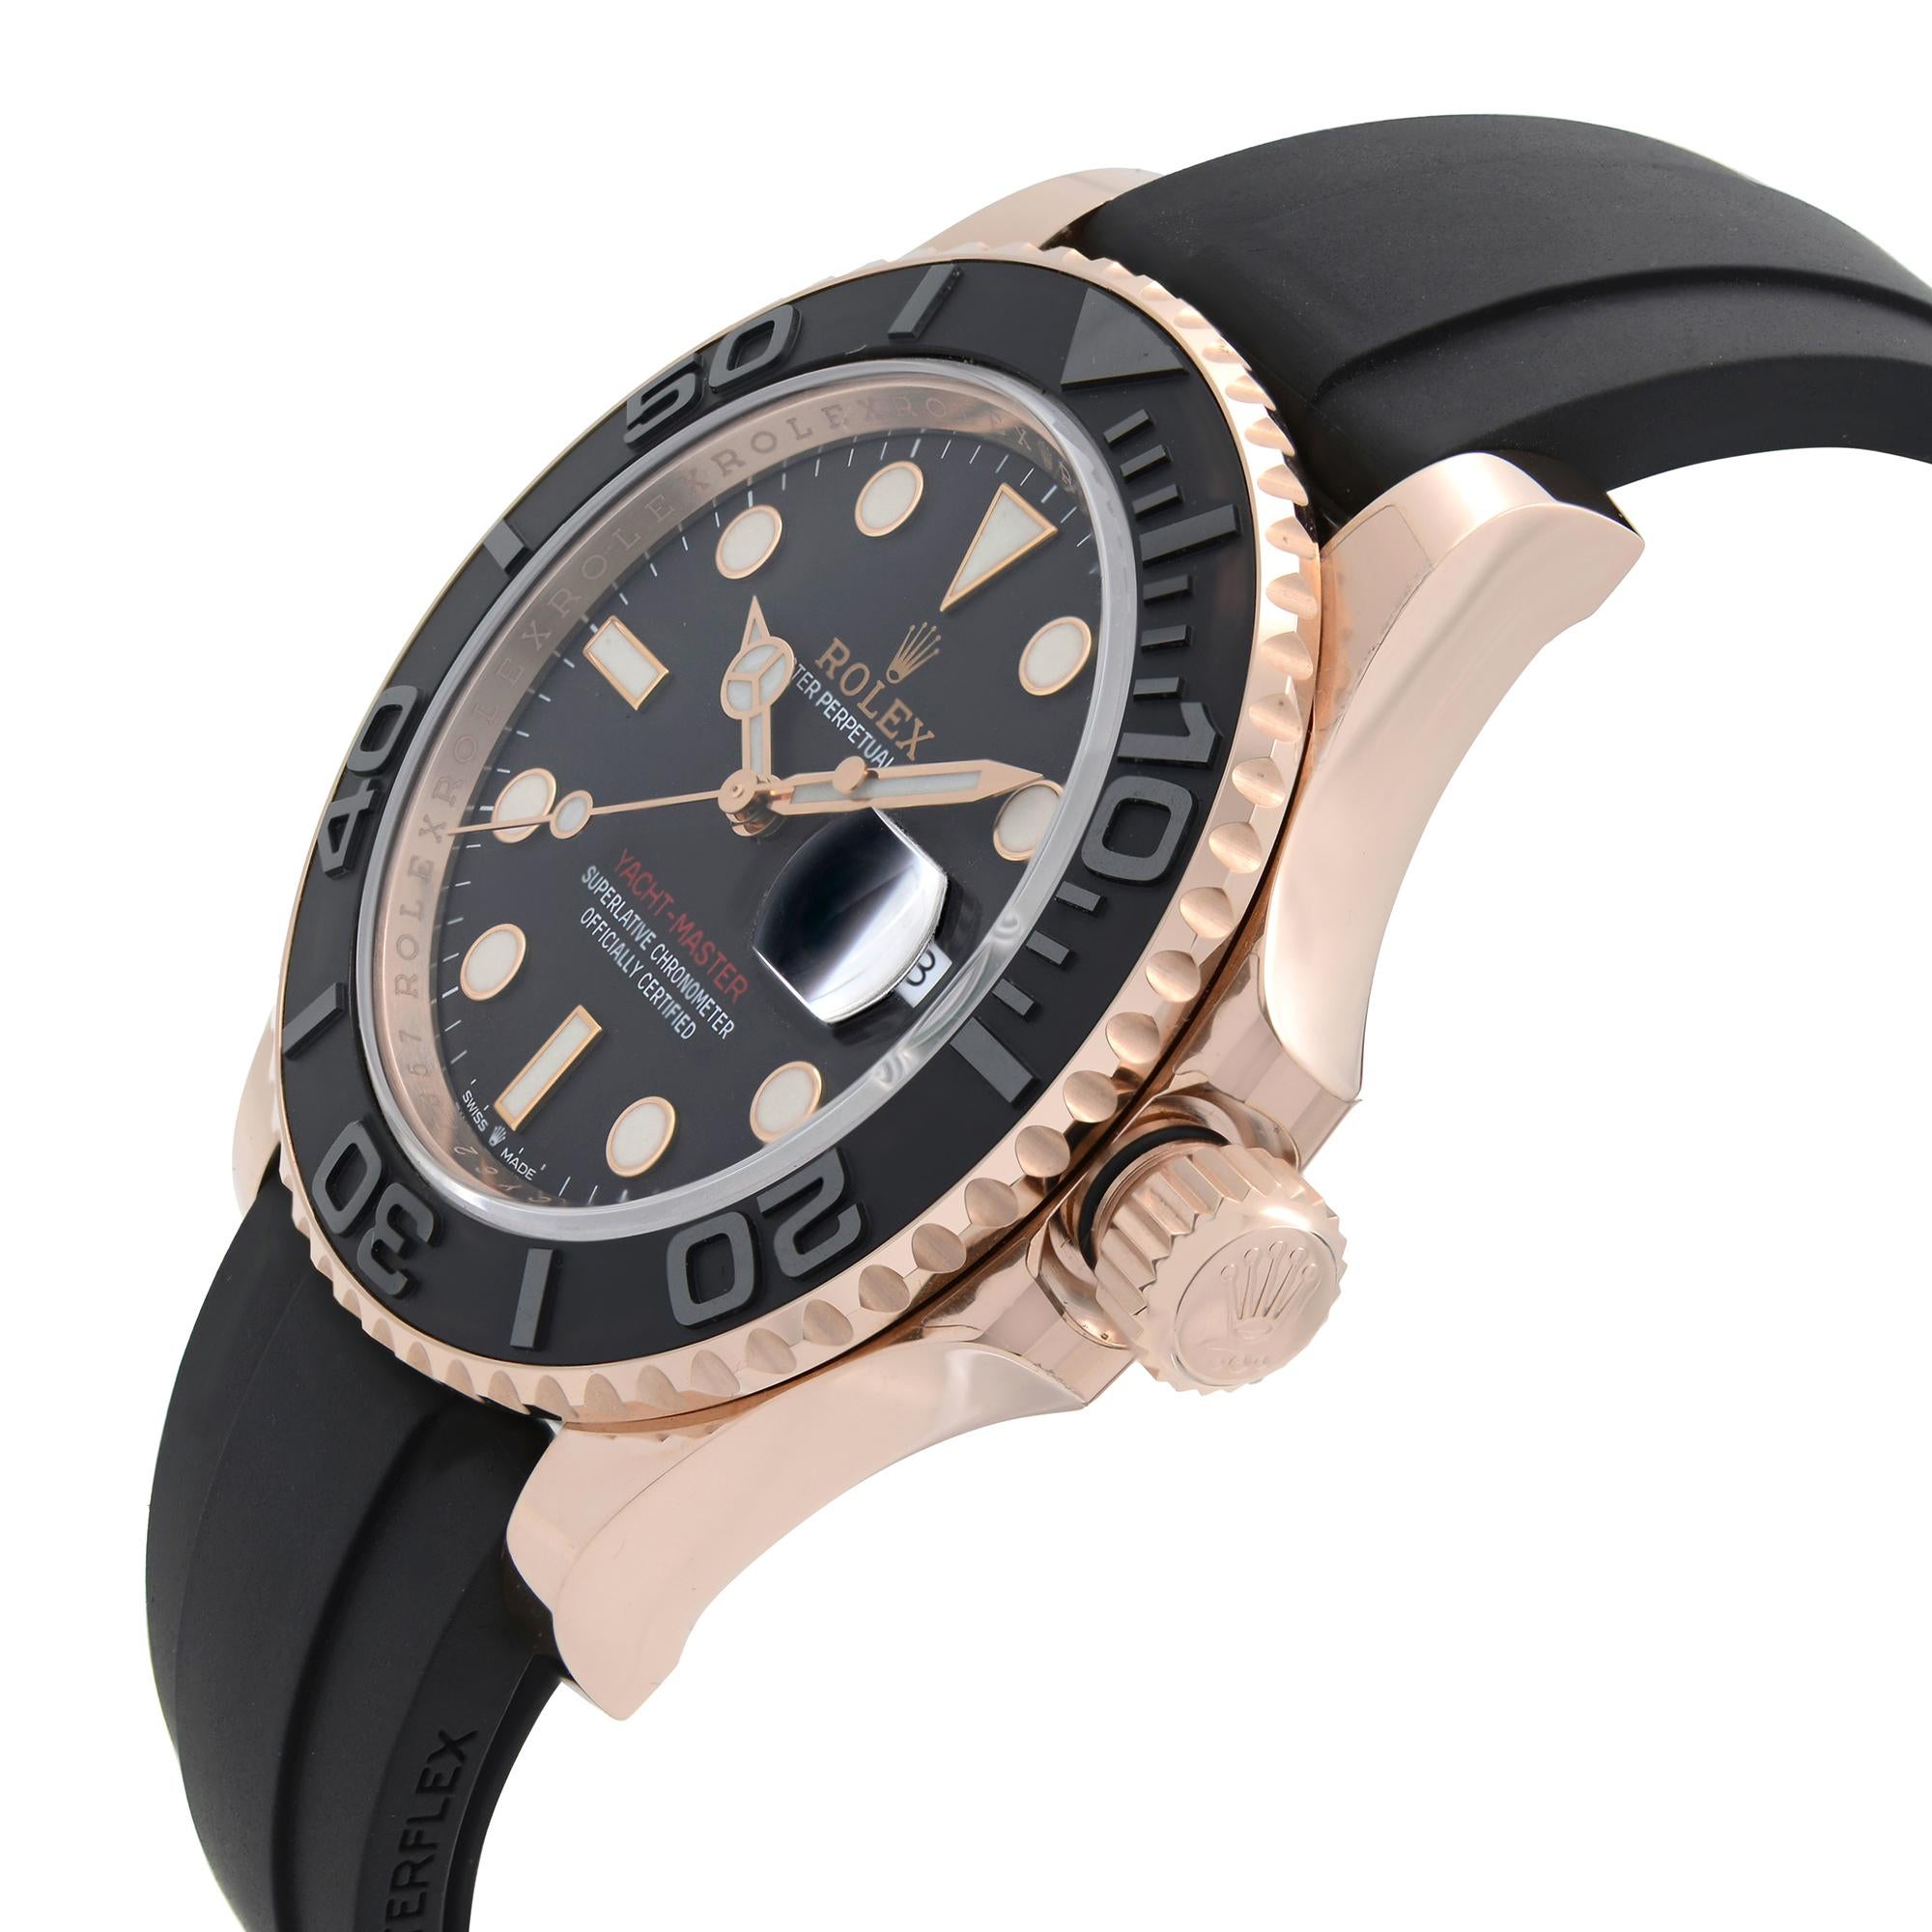 Display Model Rolex Yacht-Master 40MM 18k Rose Gold Black Dial Automatic Men's Watch 126655. 18k Rose Gold Case with a Black Oysterflex Rubber Band. Bi-Directional Rotating Coin Edge 18k Rose Gold Bezel with a Black Ceramic Count-Up Elapsed Time Top